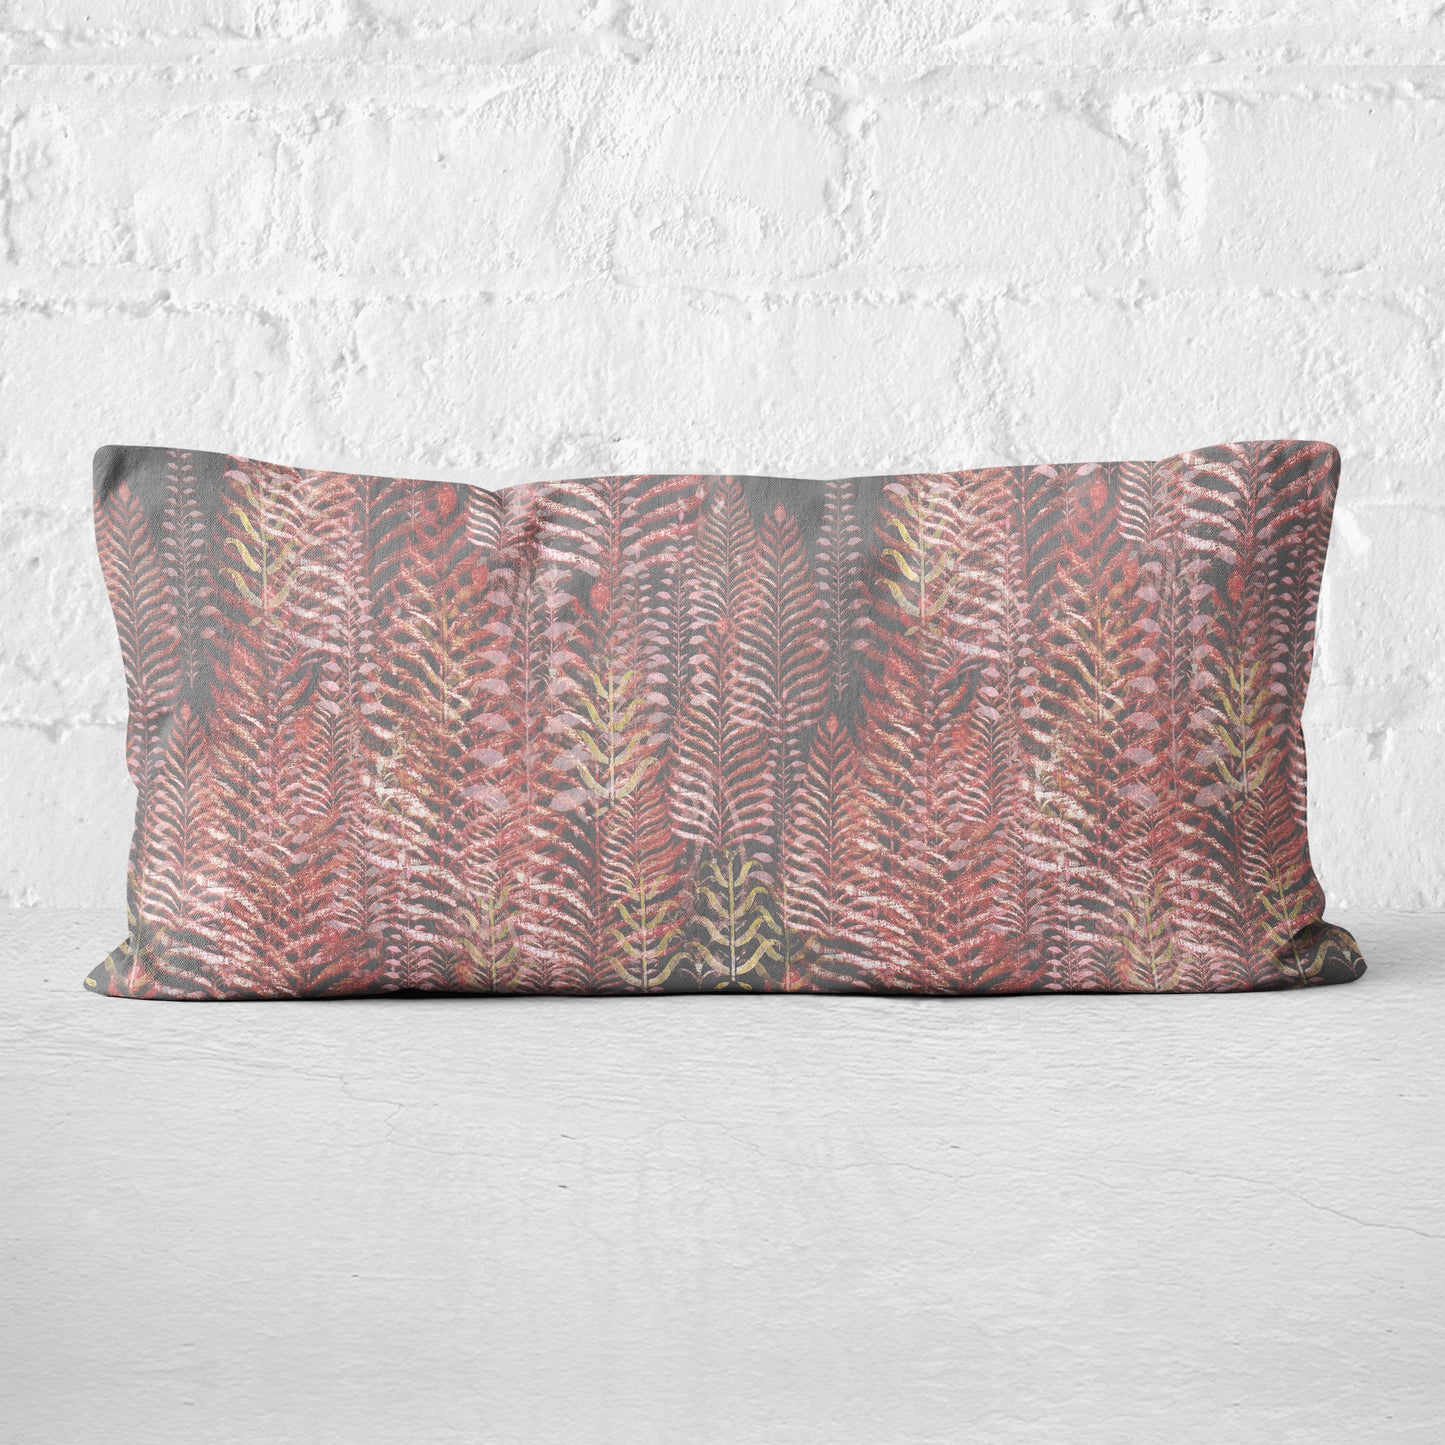 12 x 24 inch lumbar pillow featuring feather block print in pink and gray tones.